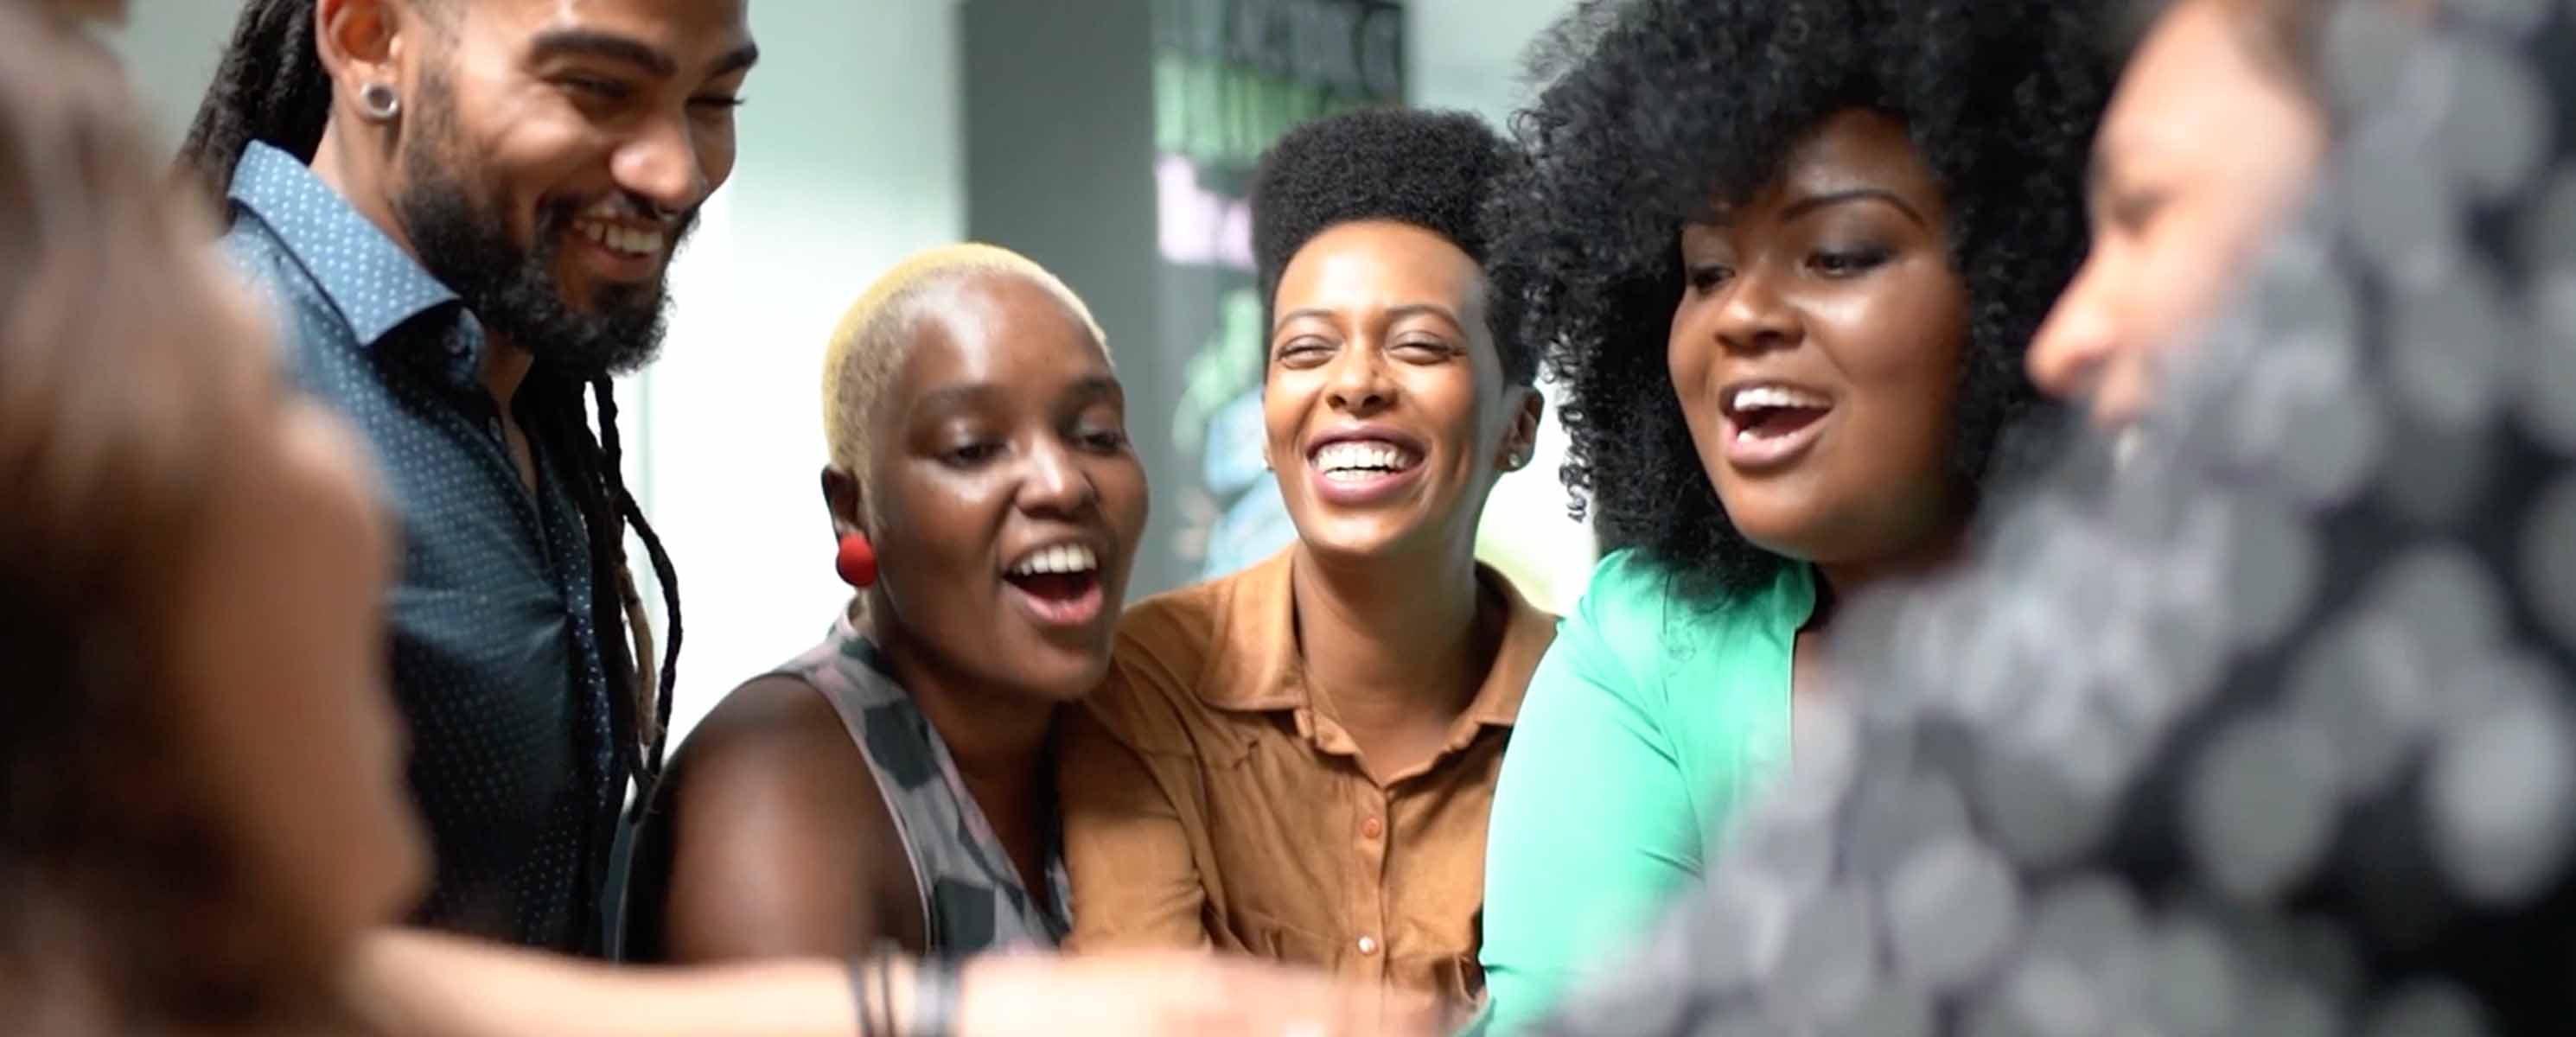 Group of young black adults laughing